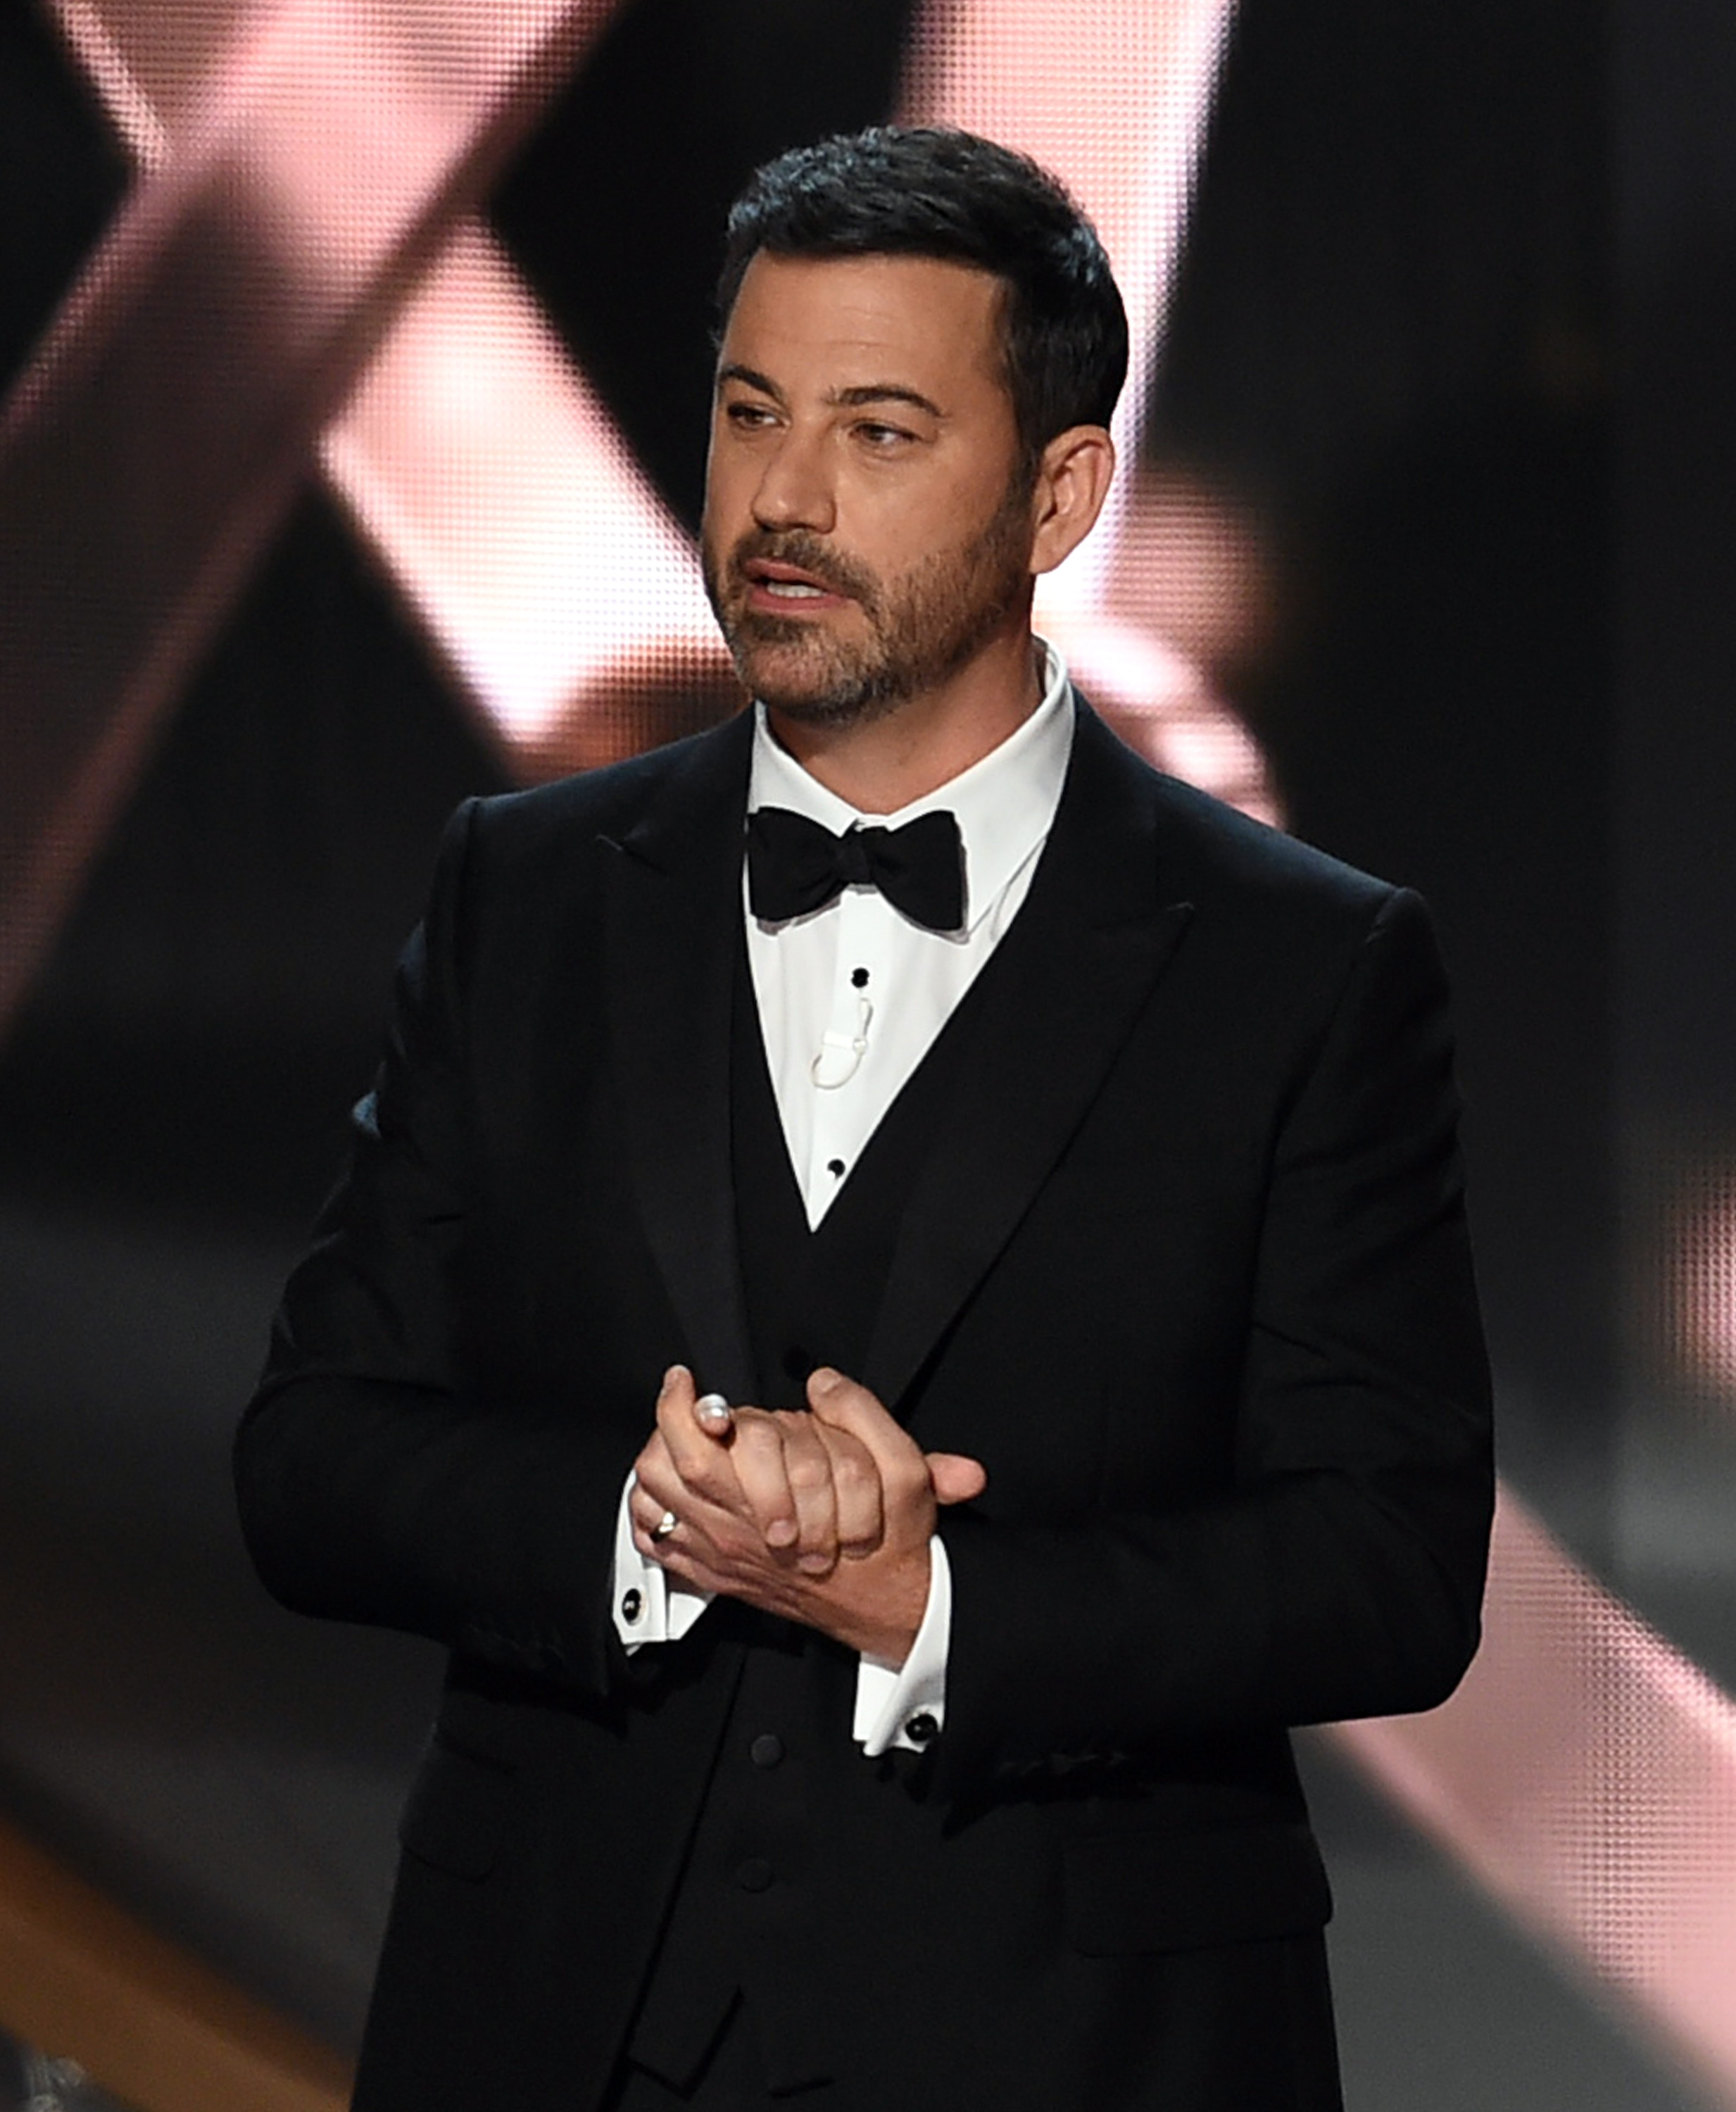 LOS ANGELES, CA - SEPTEMBER 18: Host Jimmy Kimmel speaks onstage during the 68th Annual Primetime Emmy Awards at Microsoft Theater on September 18, 2016 in Los Angeles, California.   Kevin Winter/Getty Images/AFP